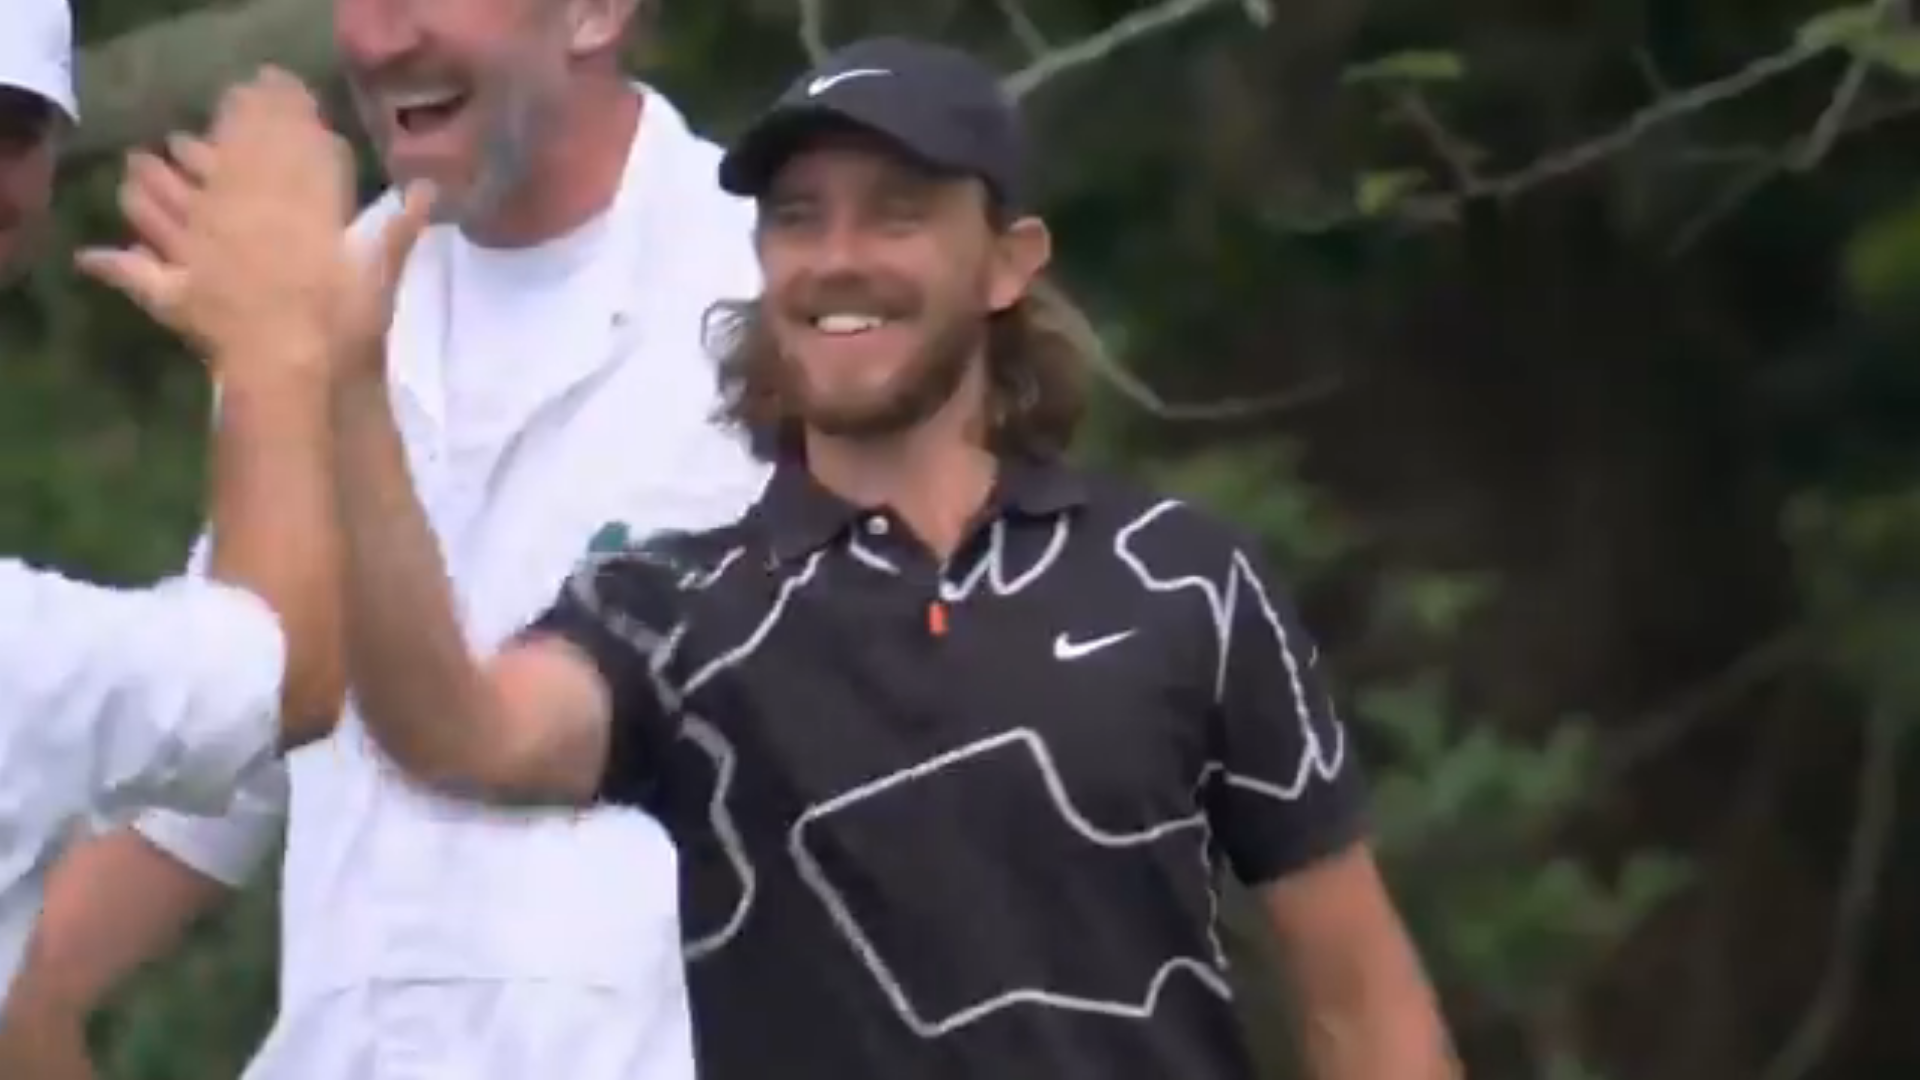 'Oh man!': Tommy Fleetwood stuns fans with hole-in-one at The Masters